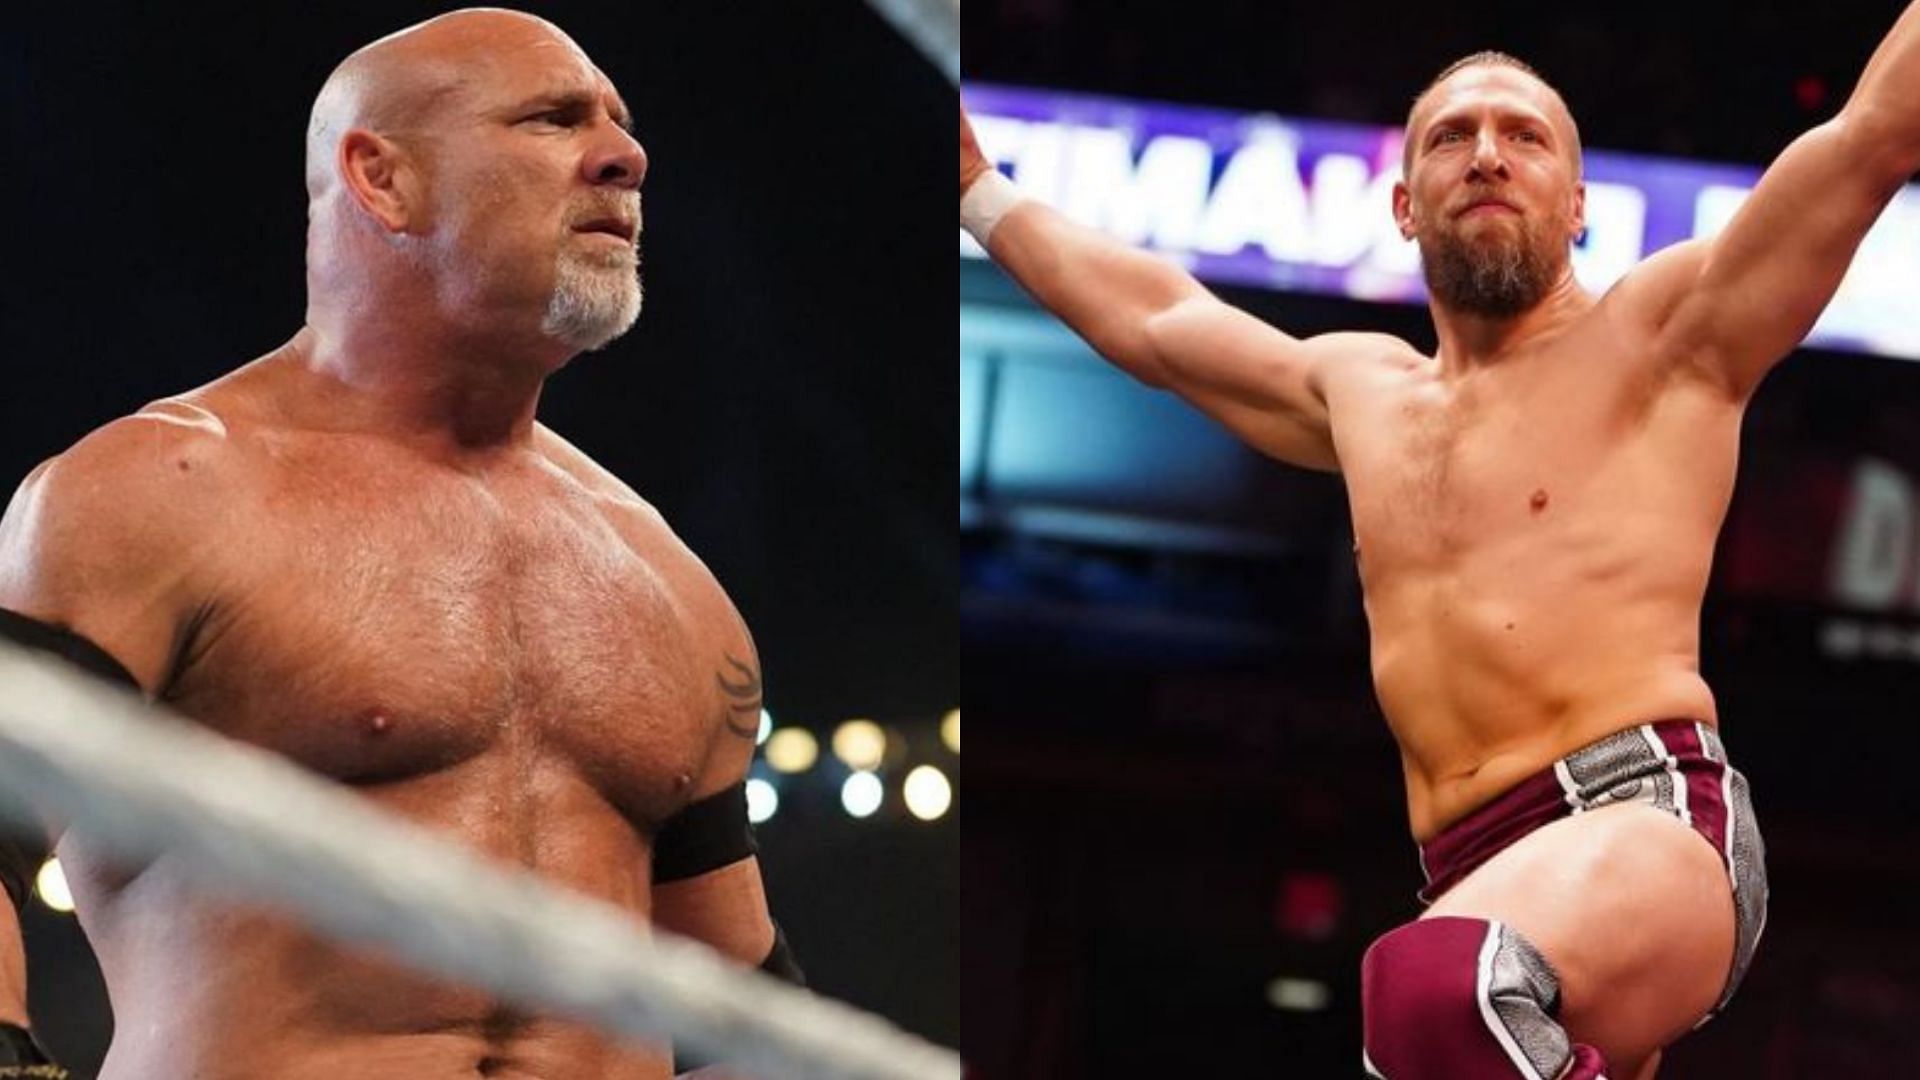 Goldberg&#039;s expiring contract with WWE might lead to a possible AEW appearance